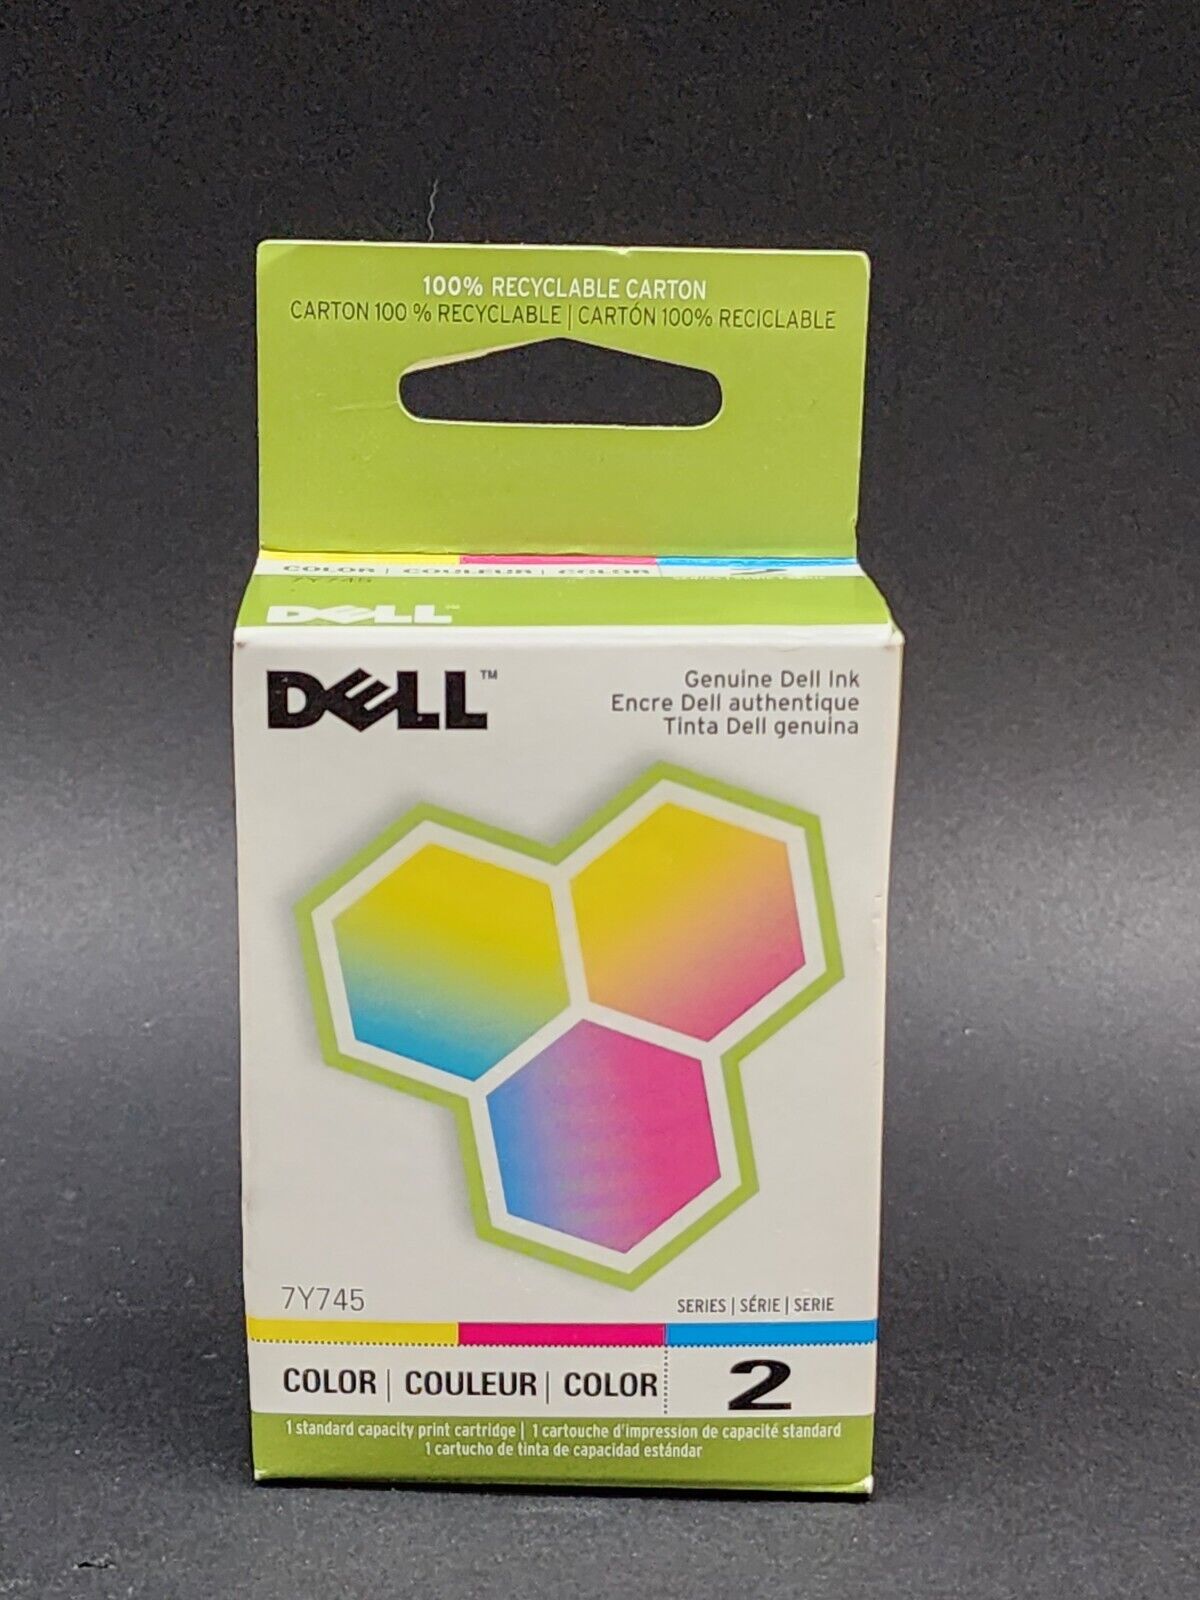 Dell 7Y745 Color Ink Cartridge for A940 A960 Printers Genuine OEM Series 2 New